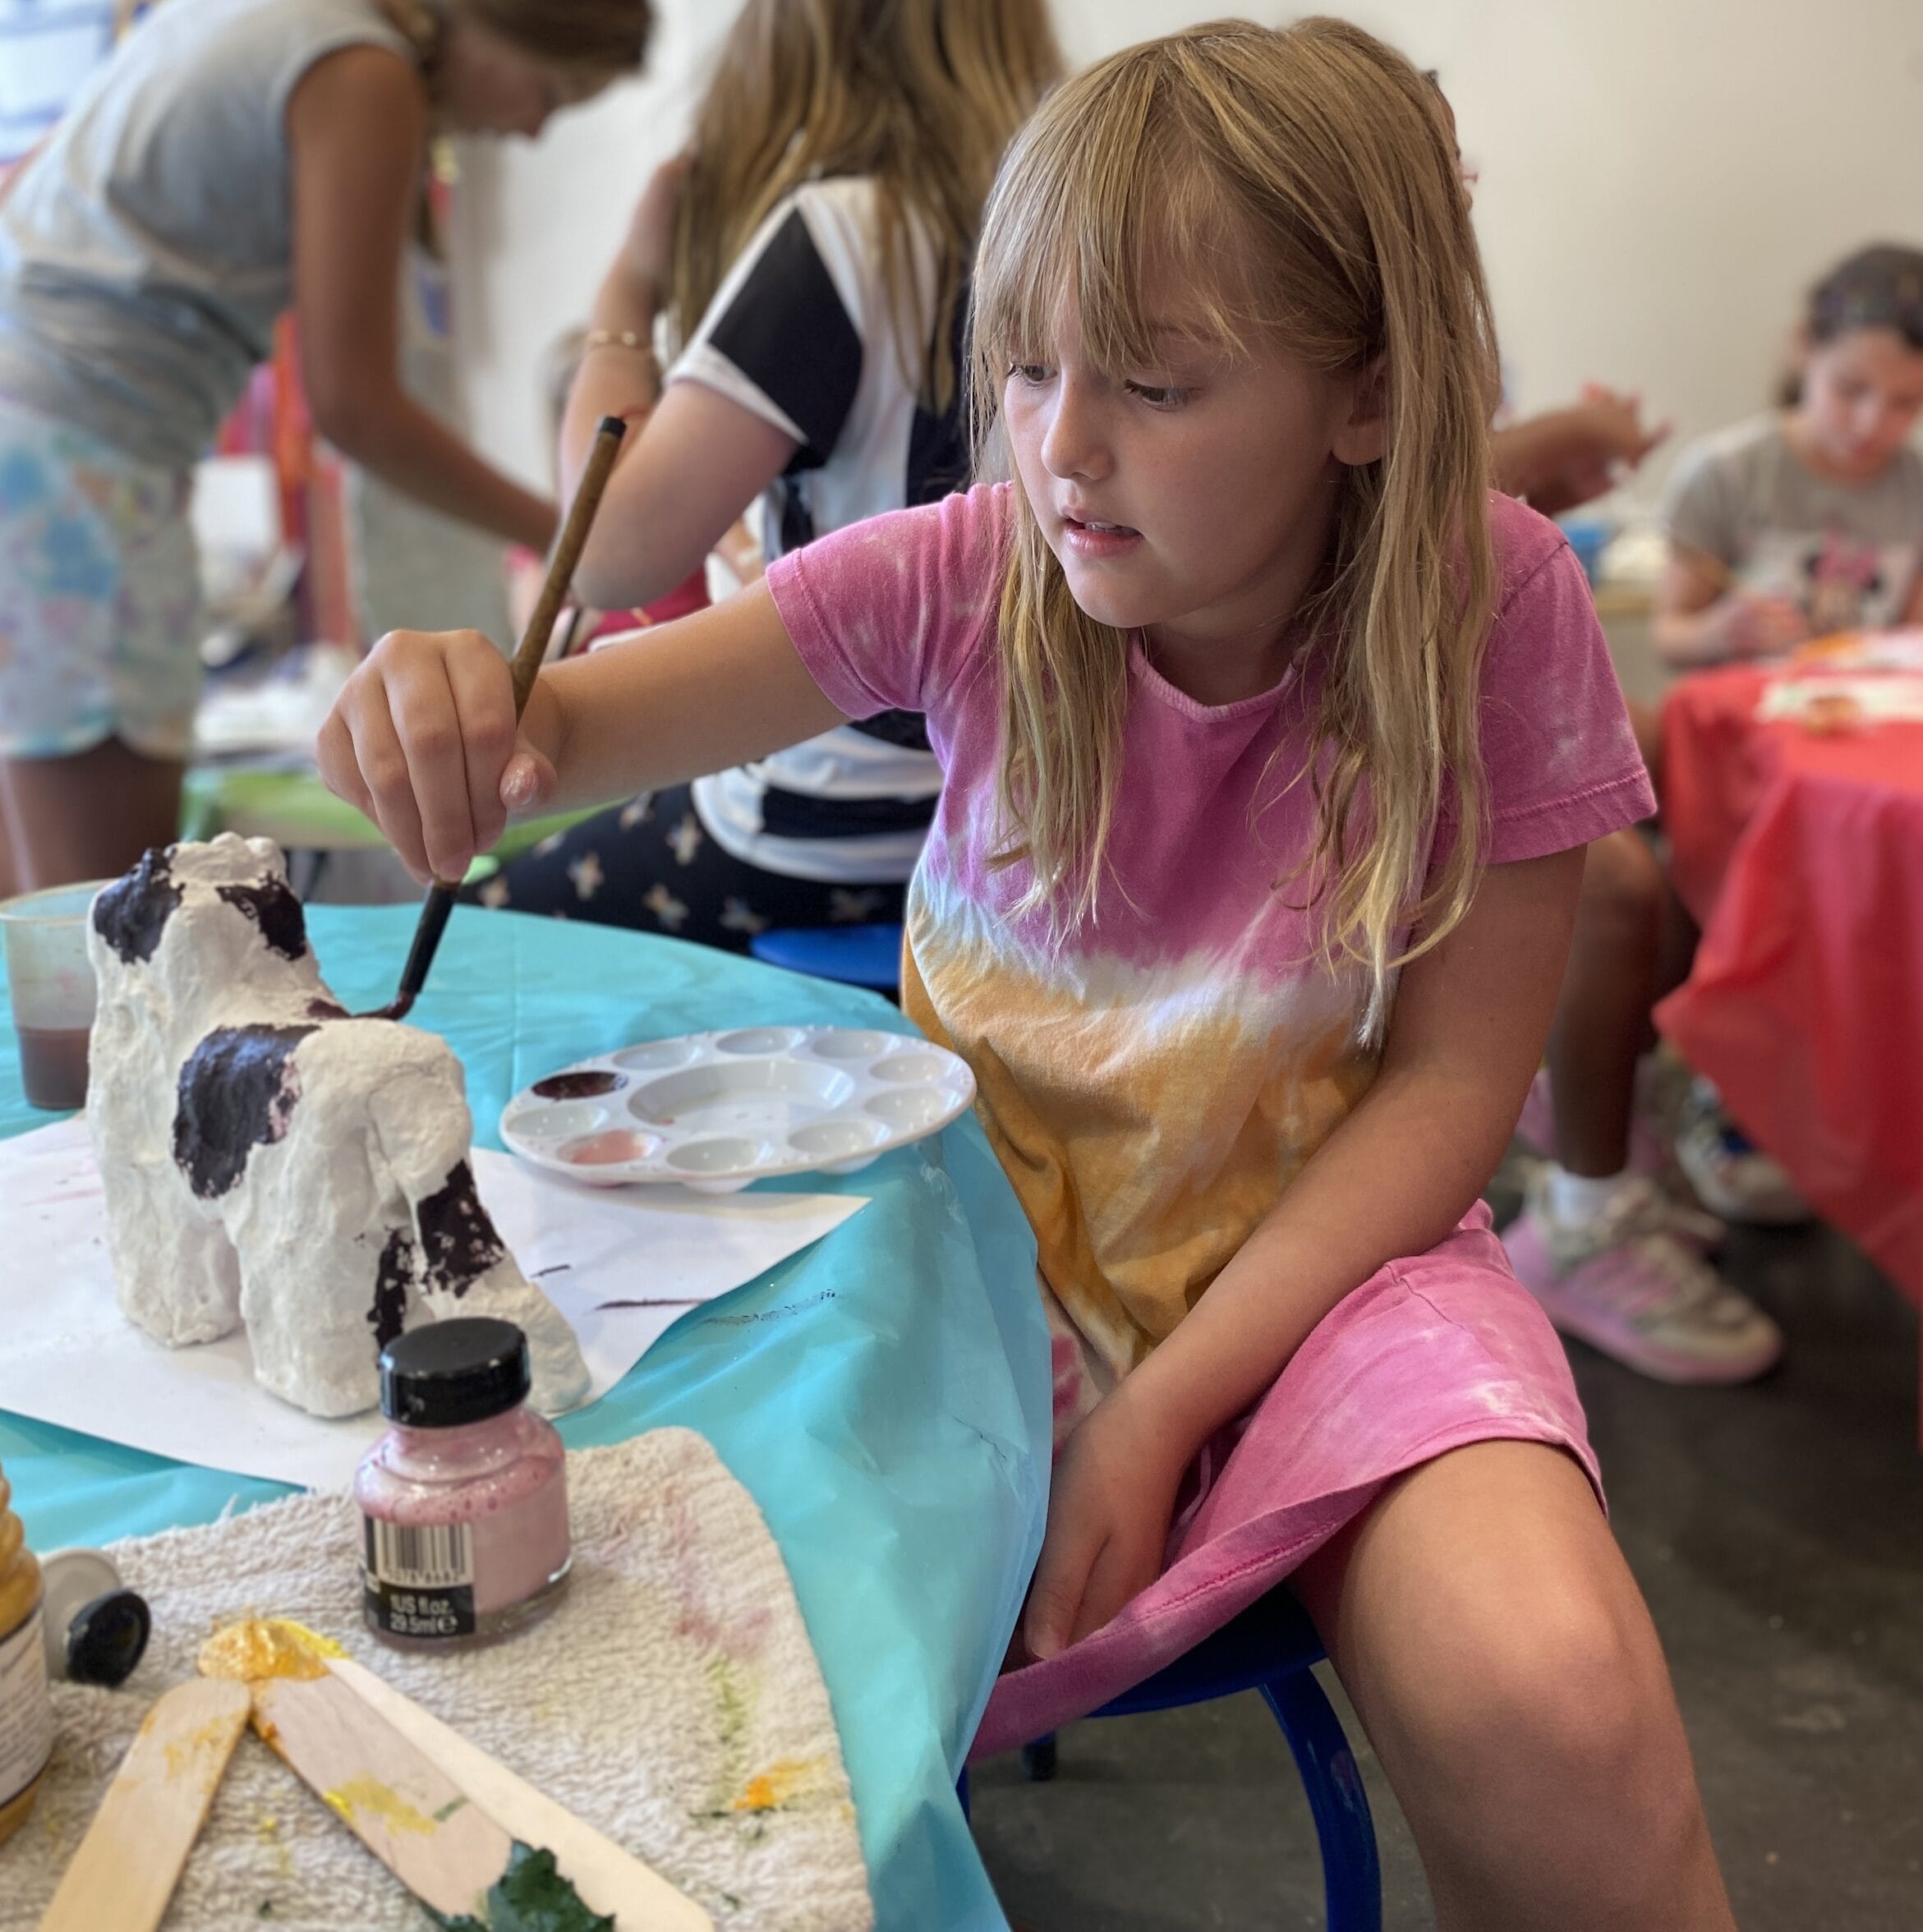 Girl wearing a pink dress sitting at a table painting a paper mache cow.